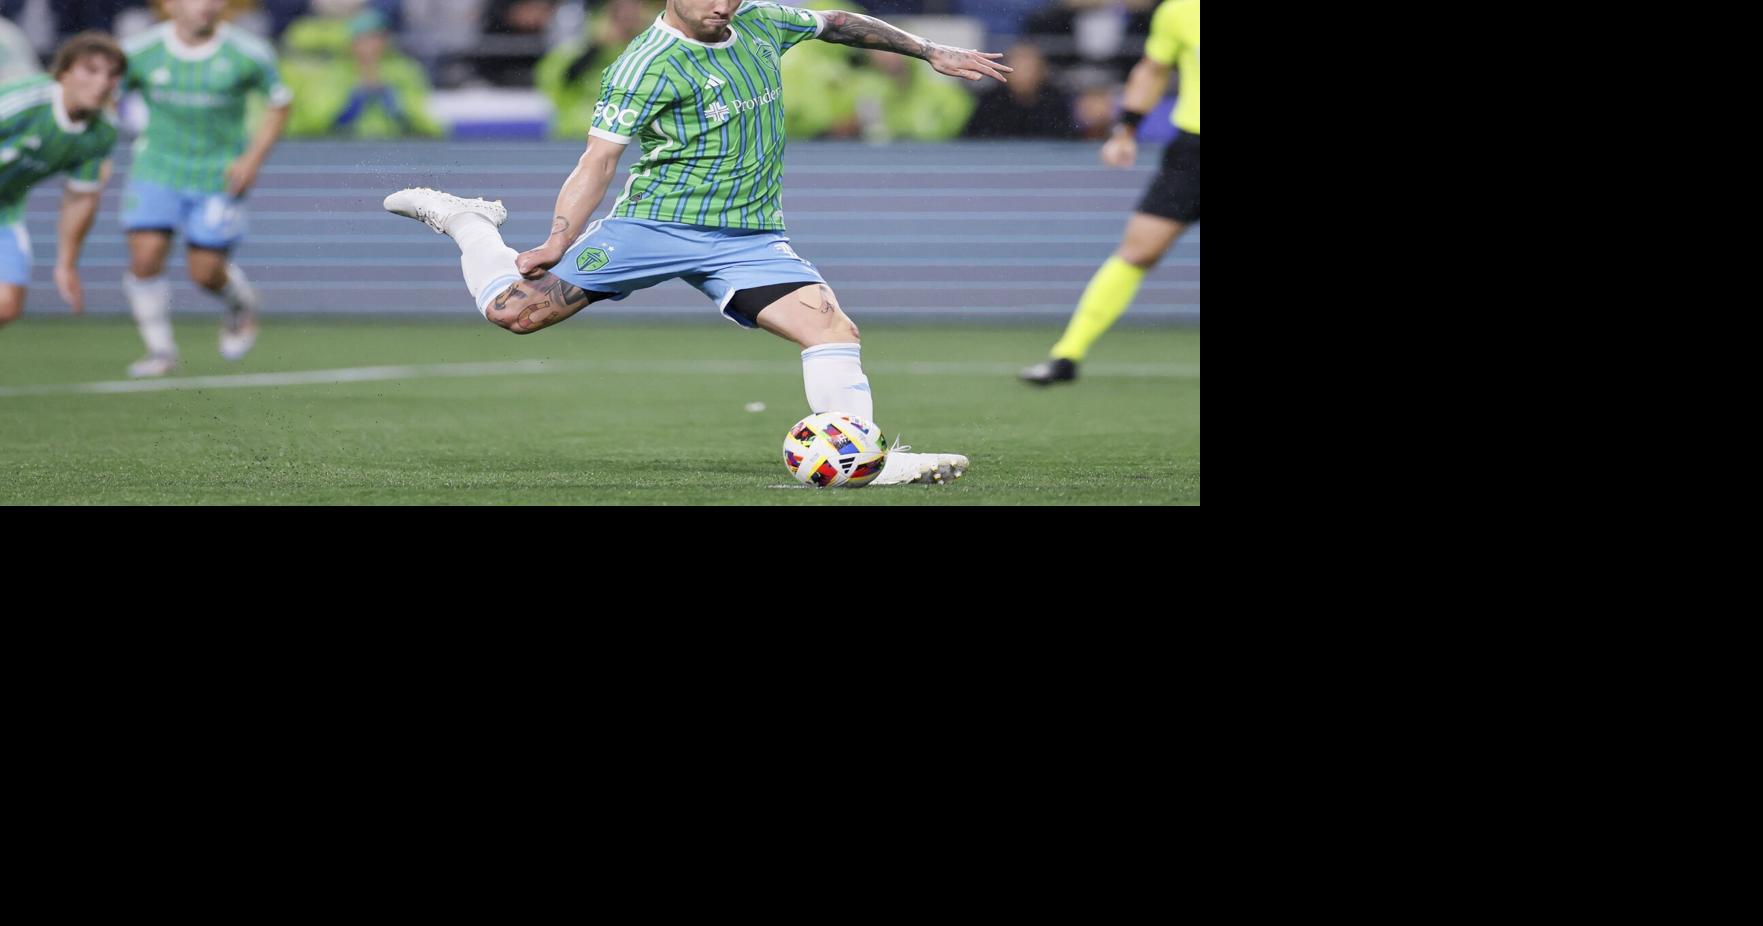 Albert Rusnák scores twice on PKs after halftime to rally Sounders to 2-1 victory over Fire